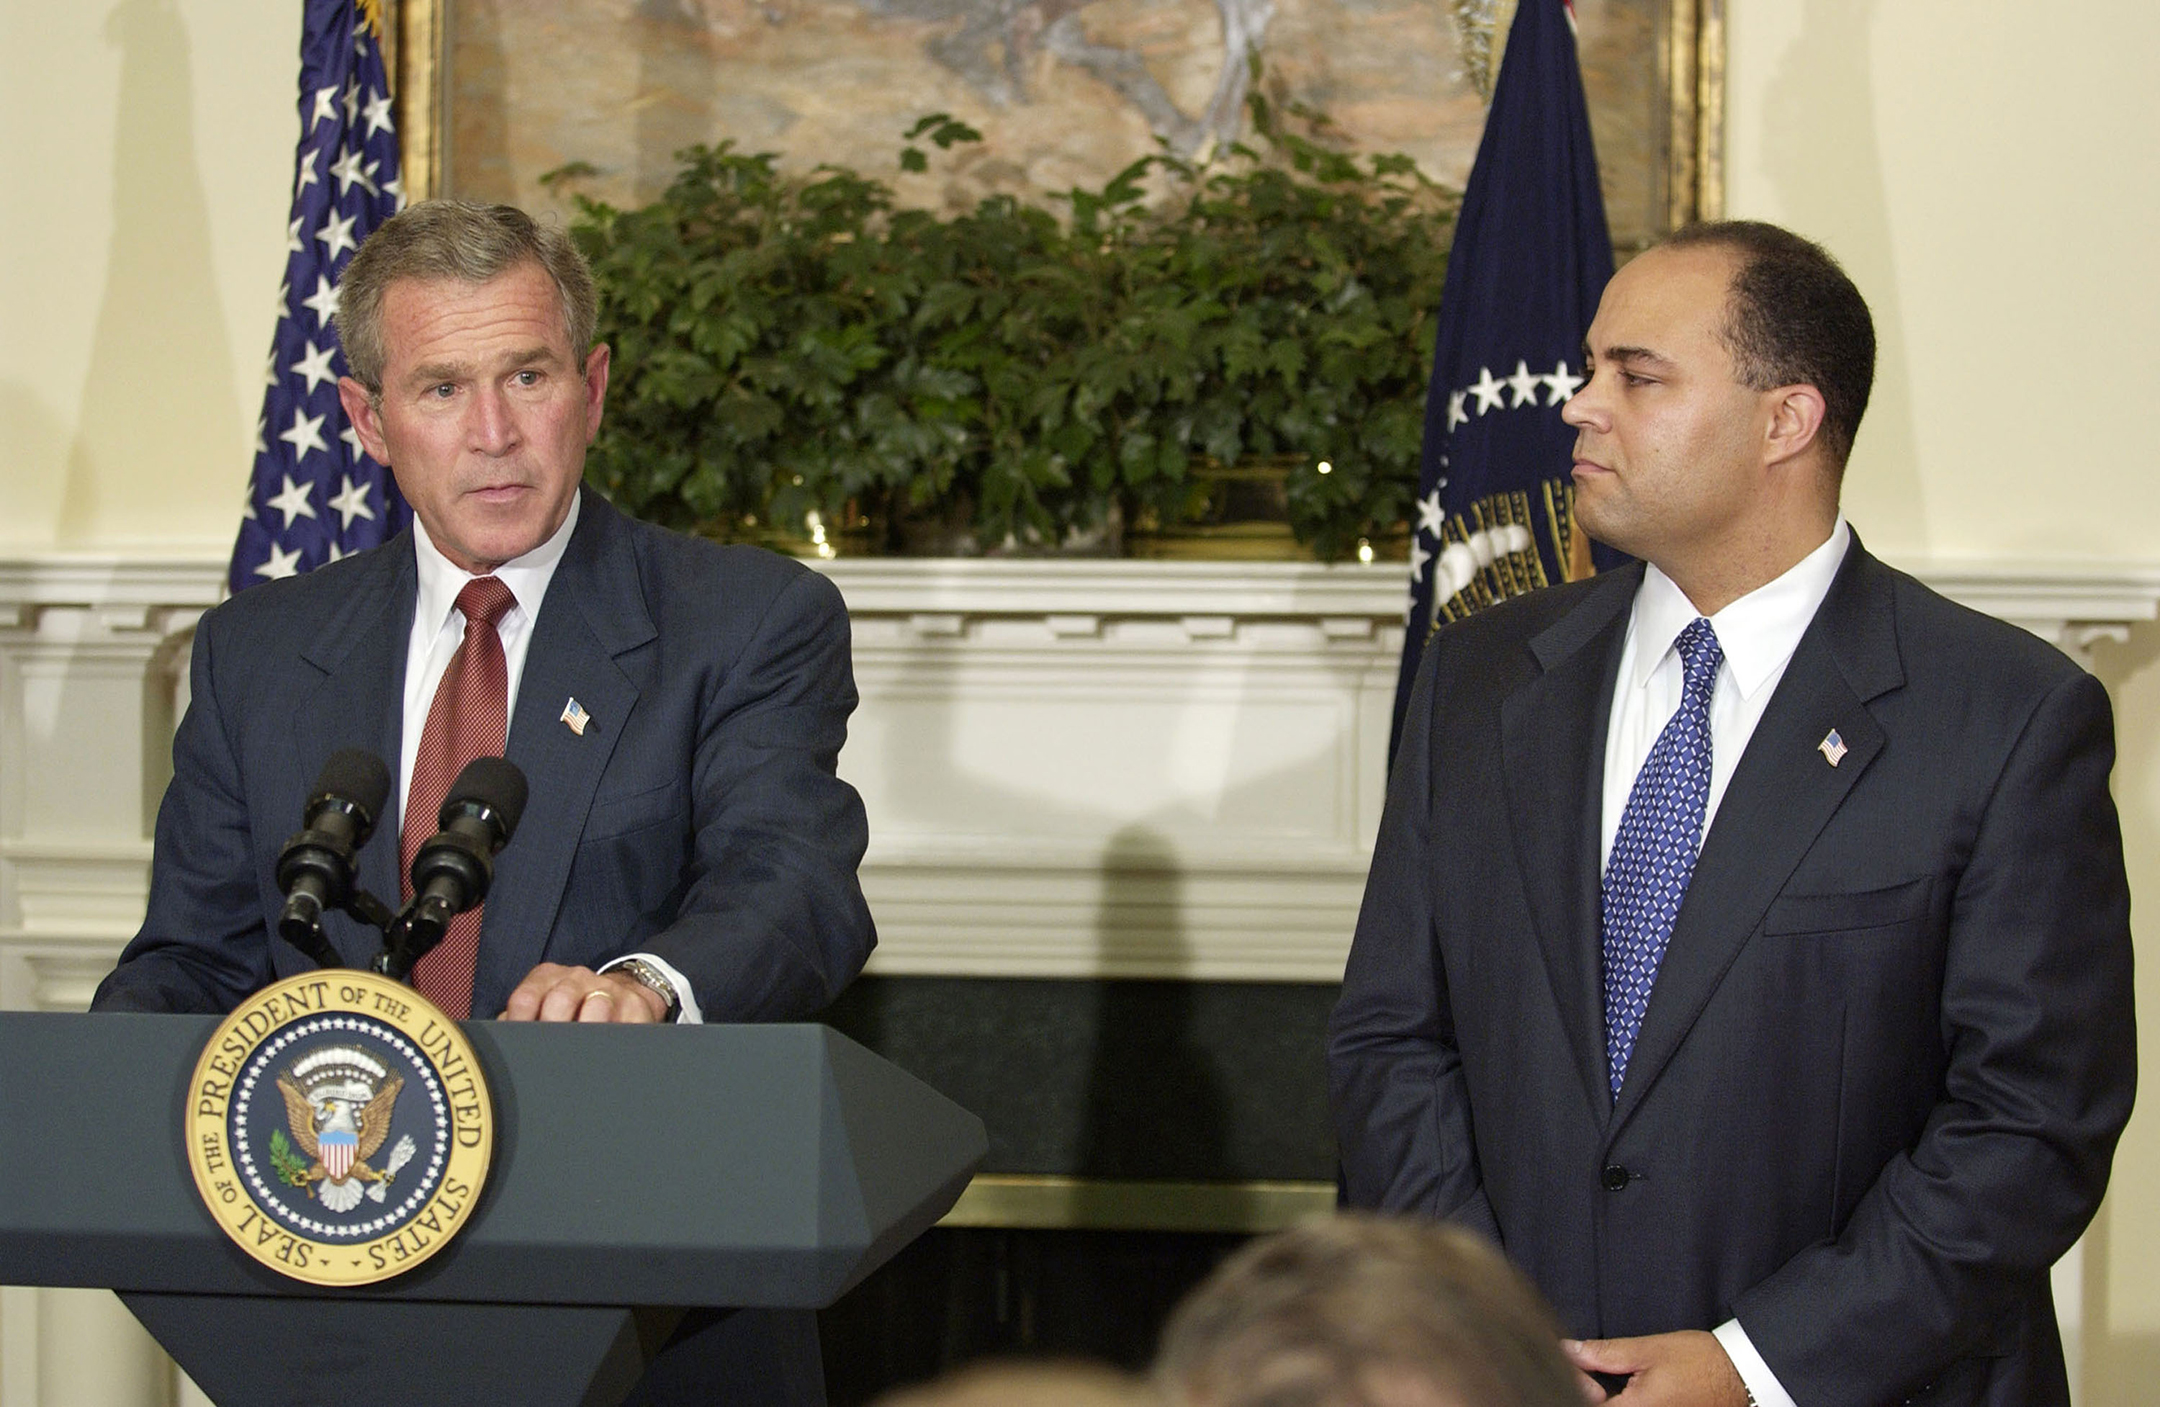 President George W. Bush, on the left, stands at a podium while Michael Powell, on the right, listens